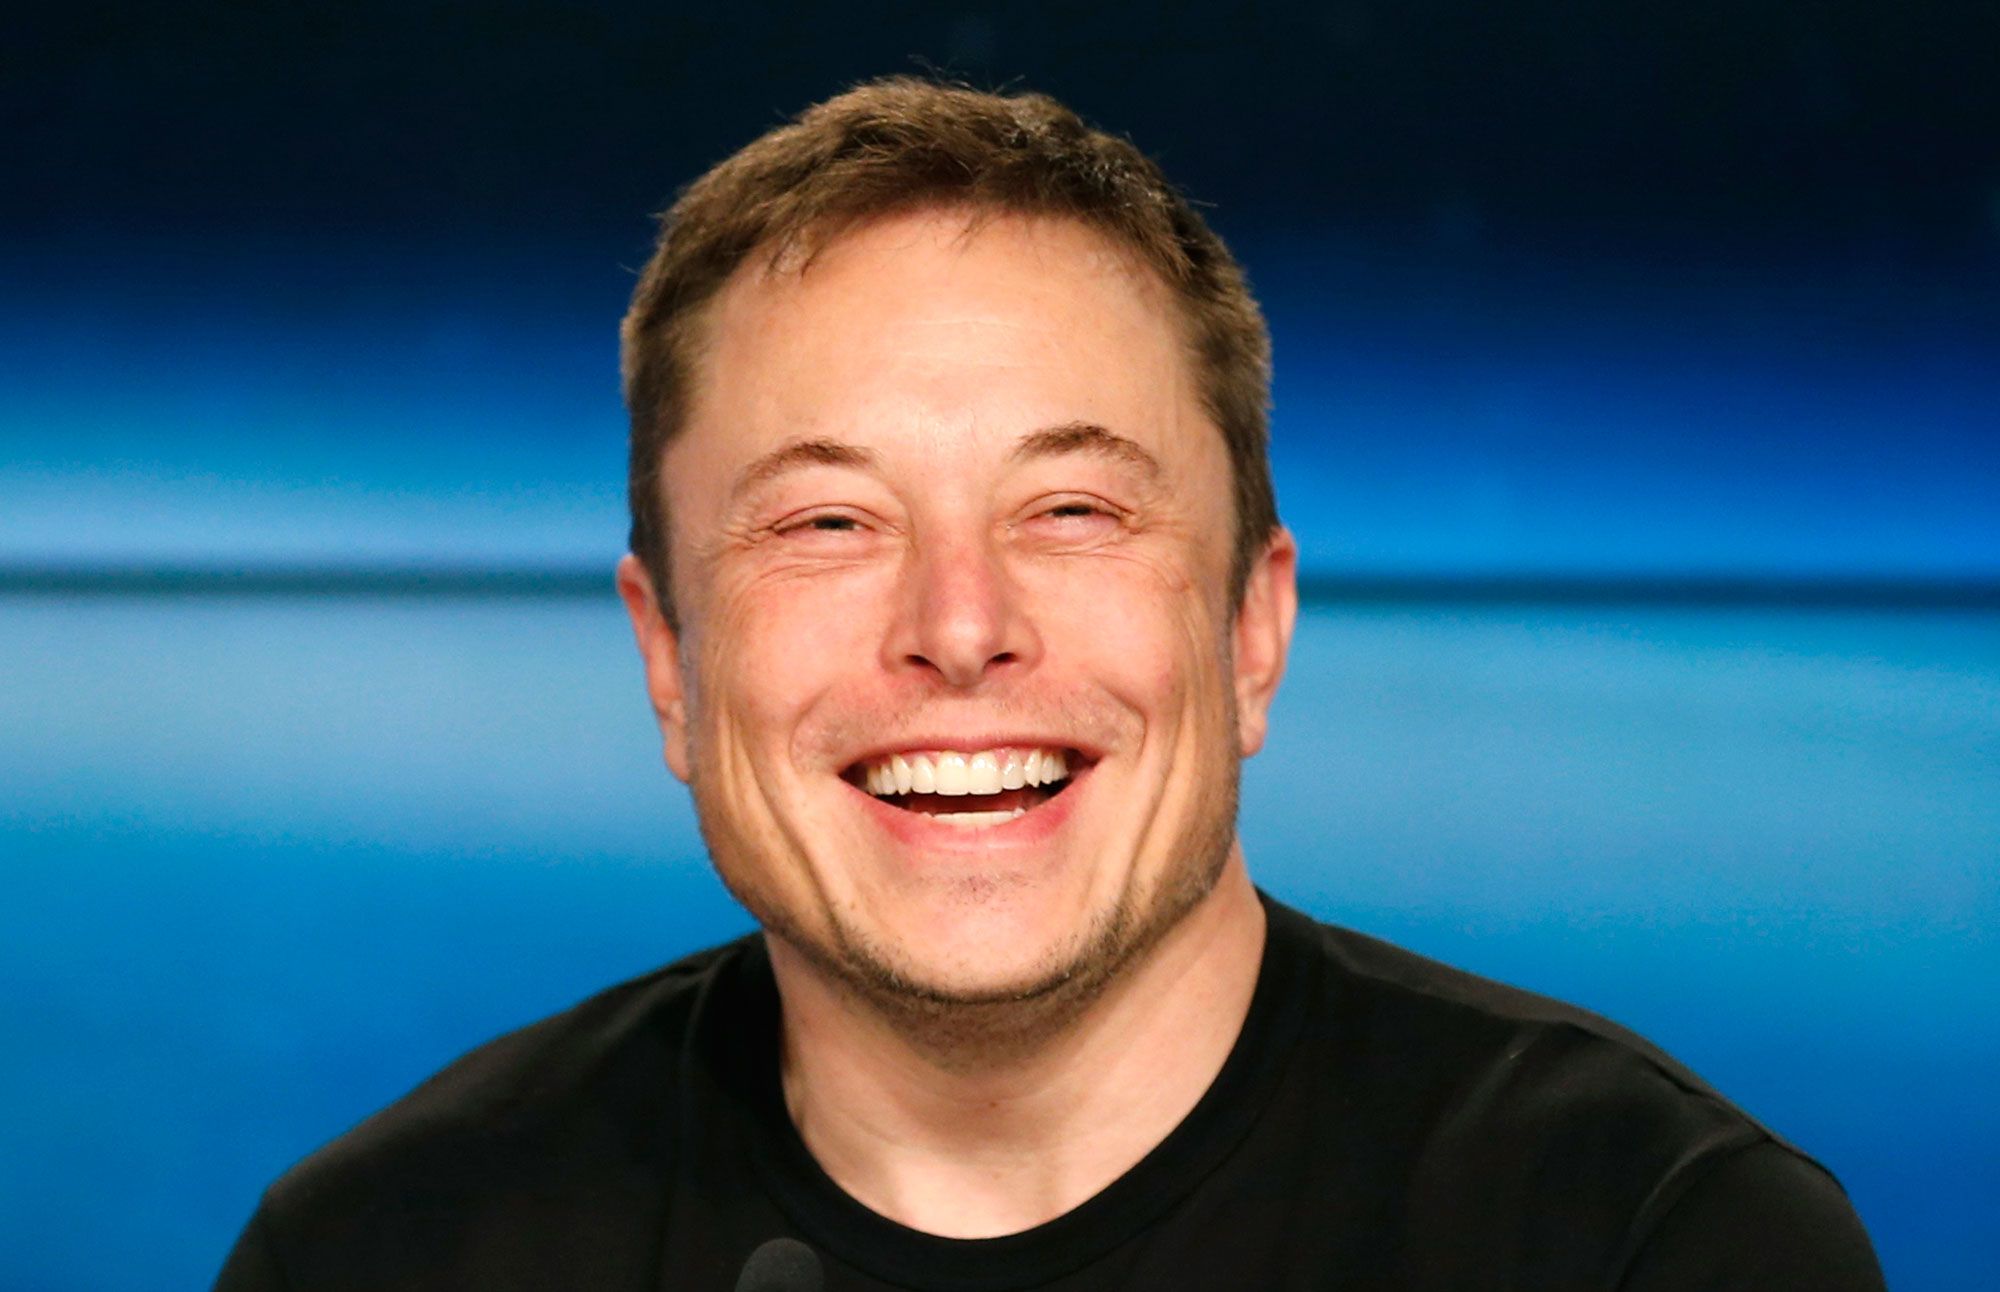 Shorts betting in opposition to Tesla lose greater than $1.Four billion in single day